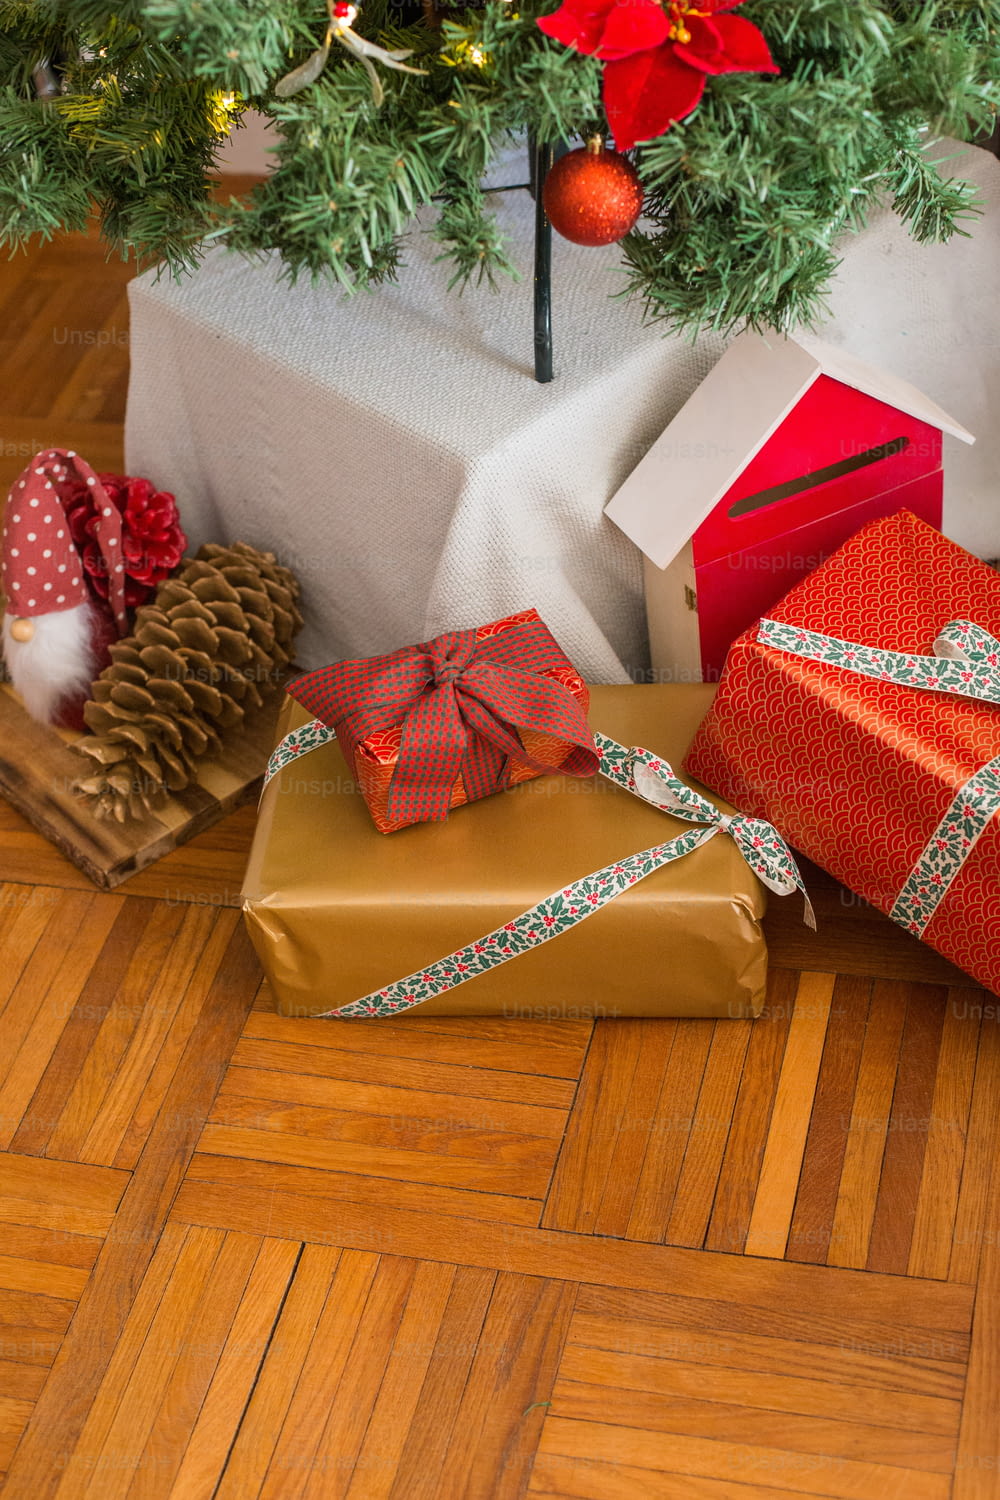 presents under a christmas tree on a wooden floor